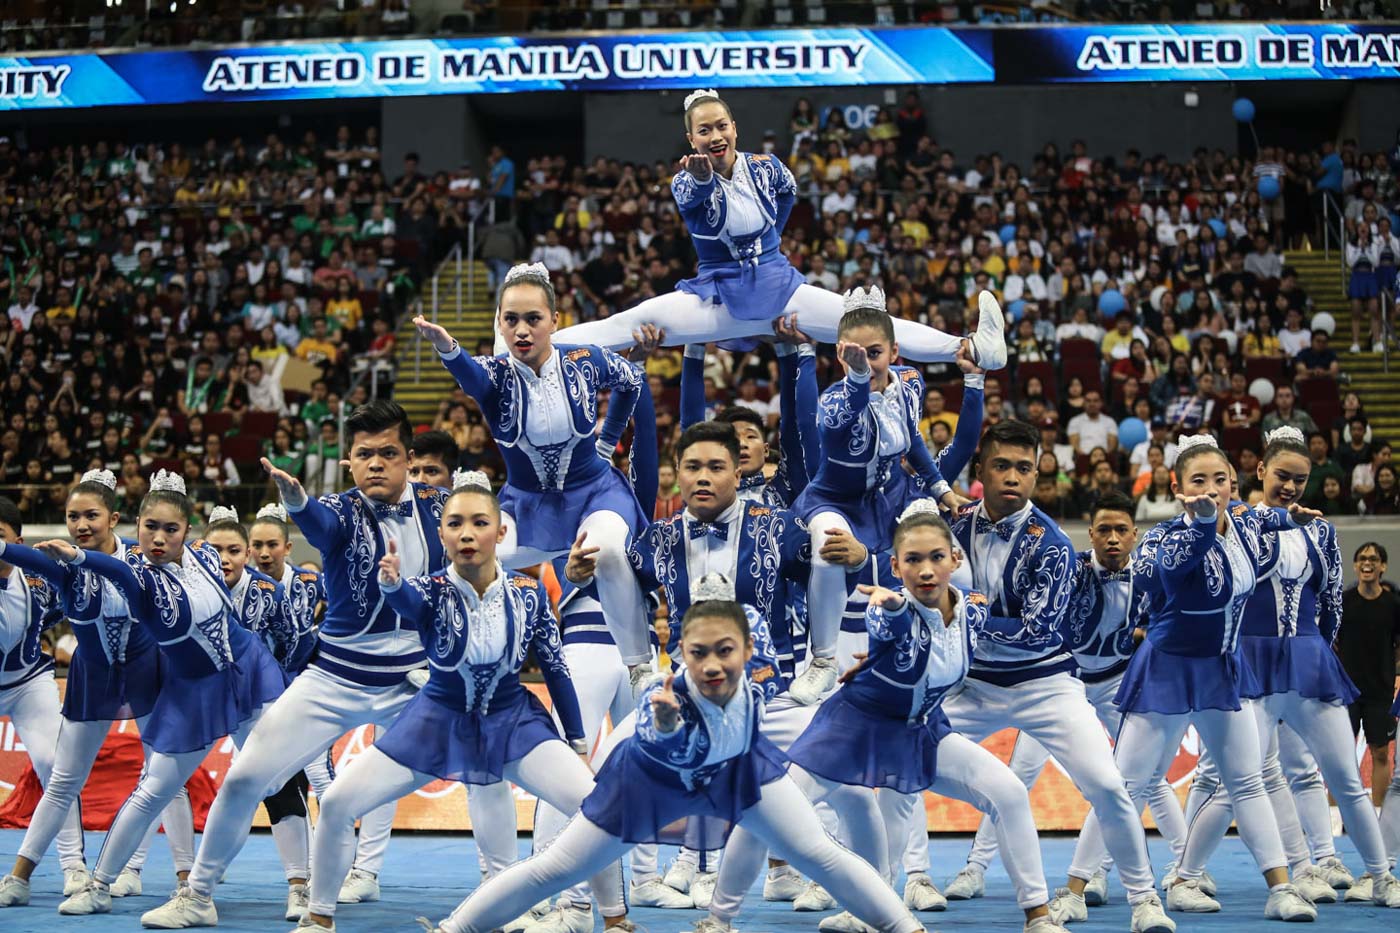 ROYALTY. After 5 years at the bottom, the Ateneo Blue Babble Battalion climbs a notch higher with an entertaining Royal Disney theme. Photo by Josh Albelda/Rappler   